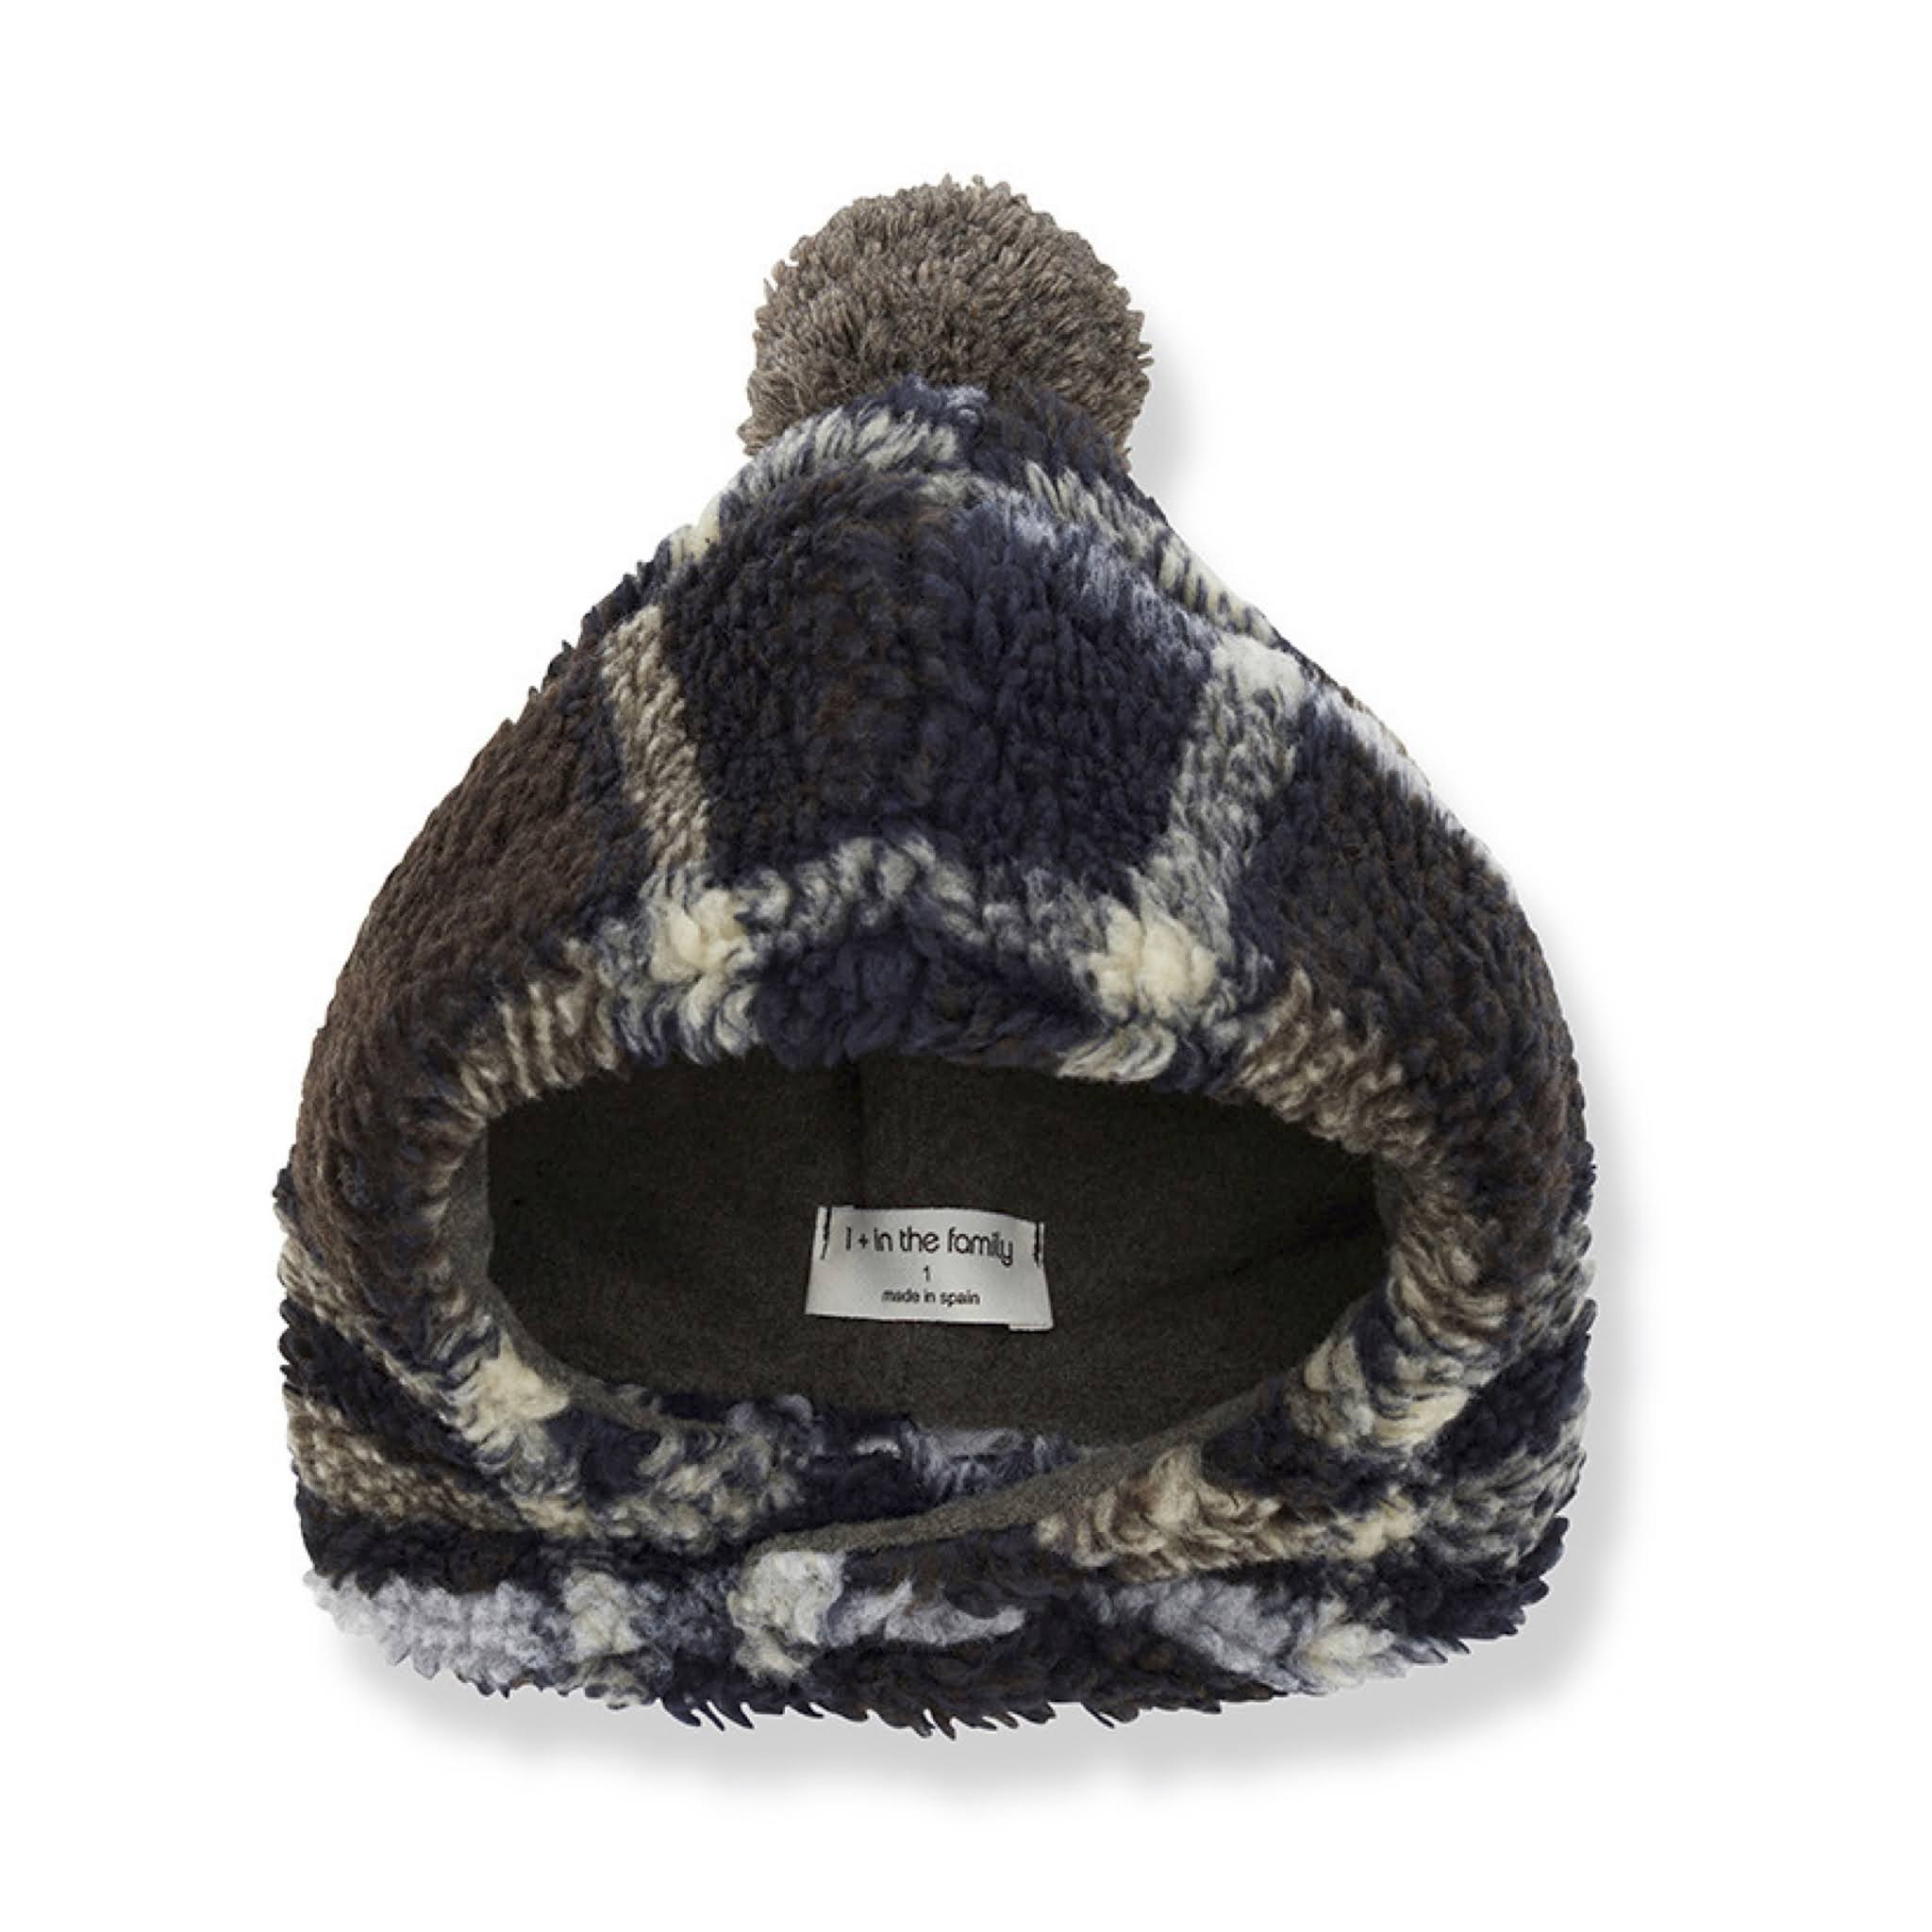 Navy Blue Baby Beanie from 1+ in the Family